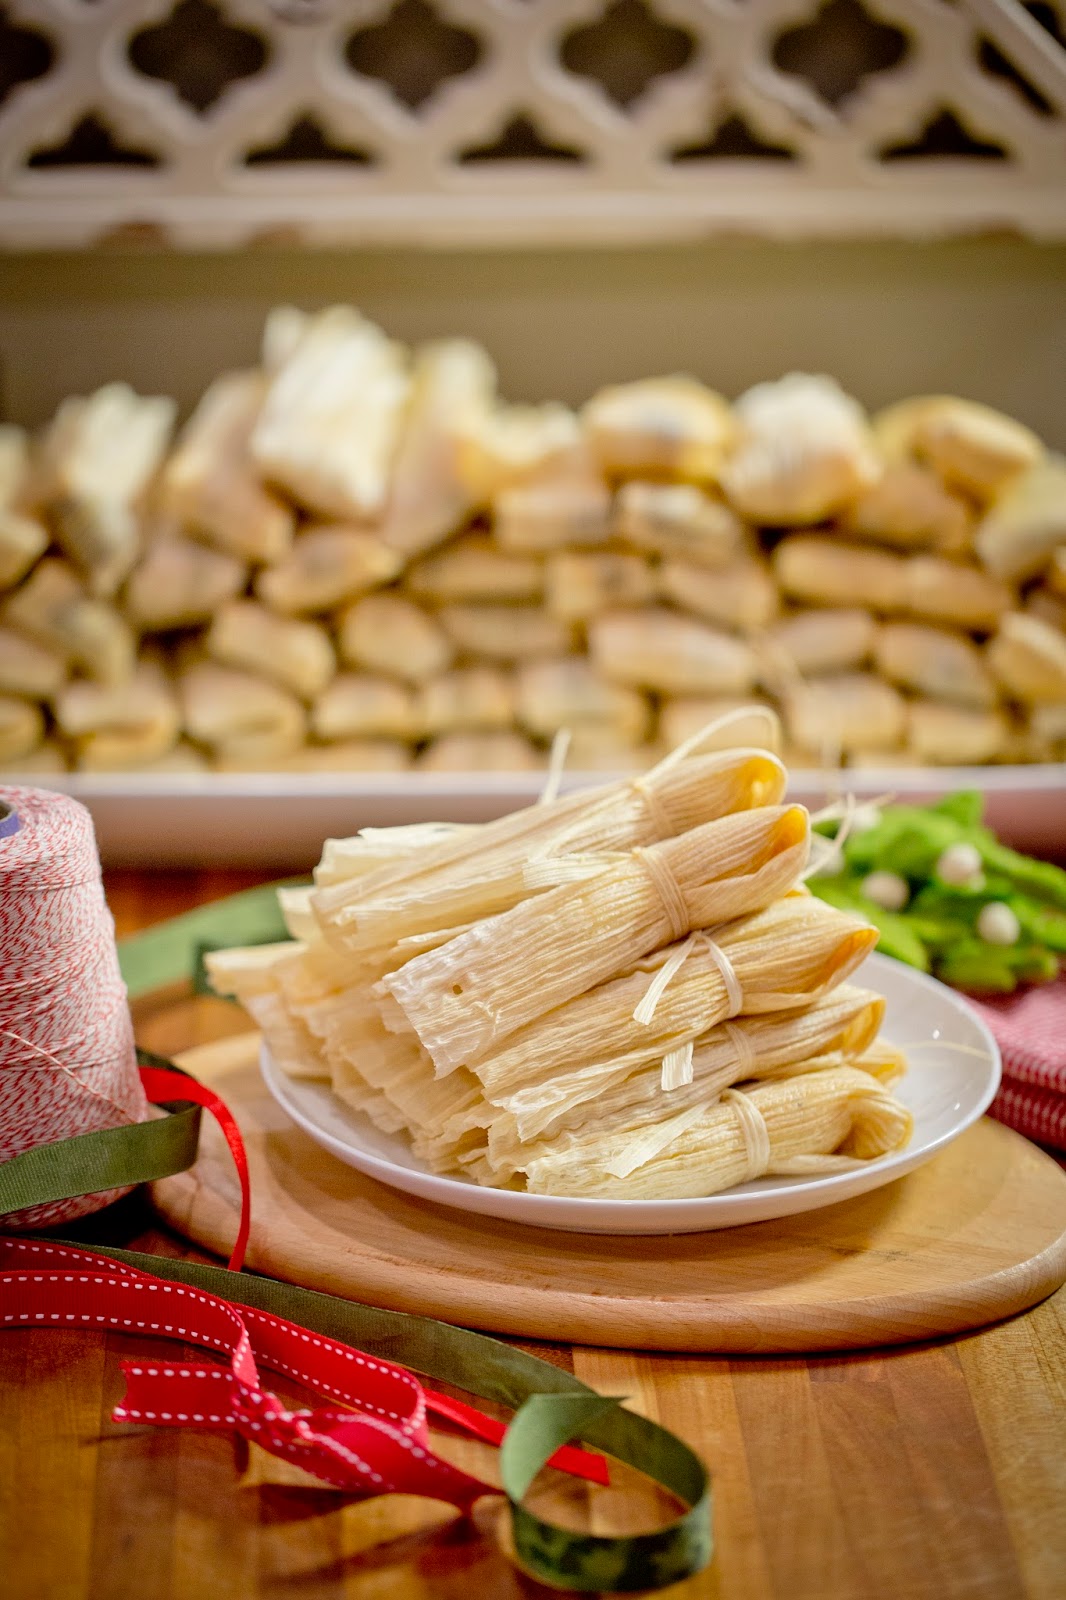 How To Make Tamales: A Beginner's Guide - Stater Bros. Markets